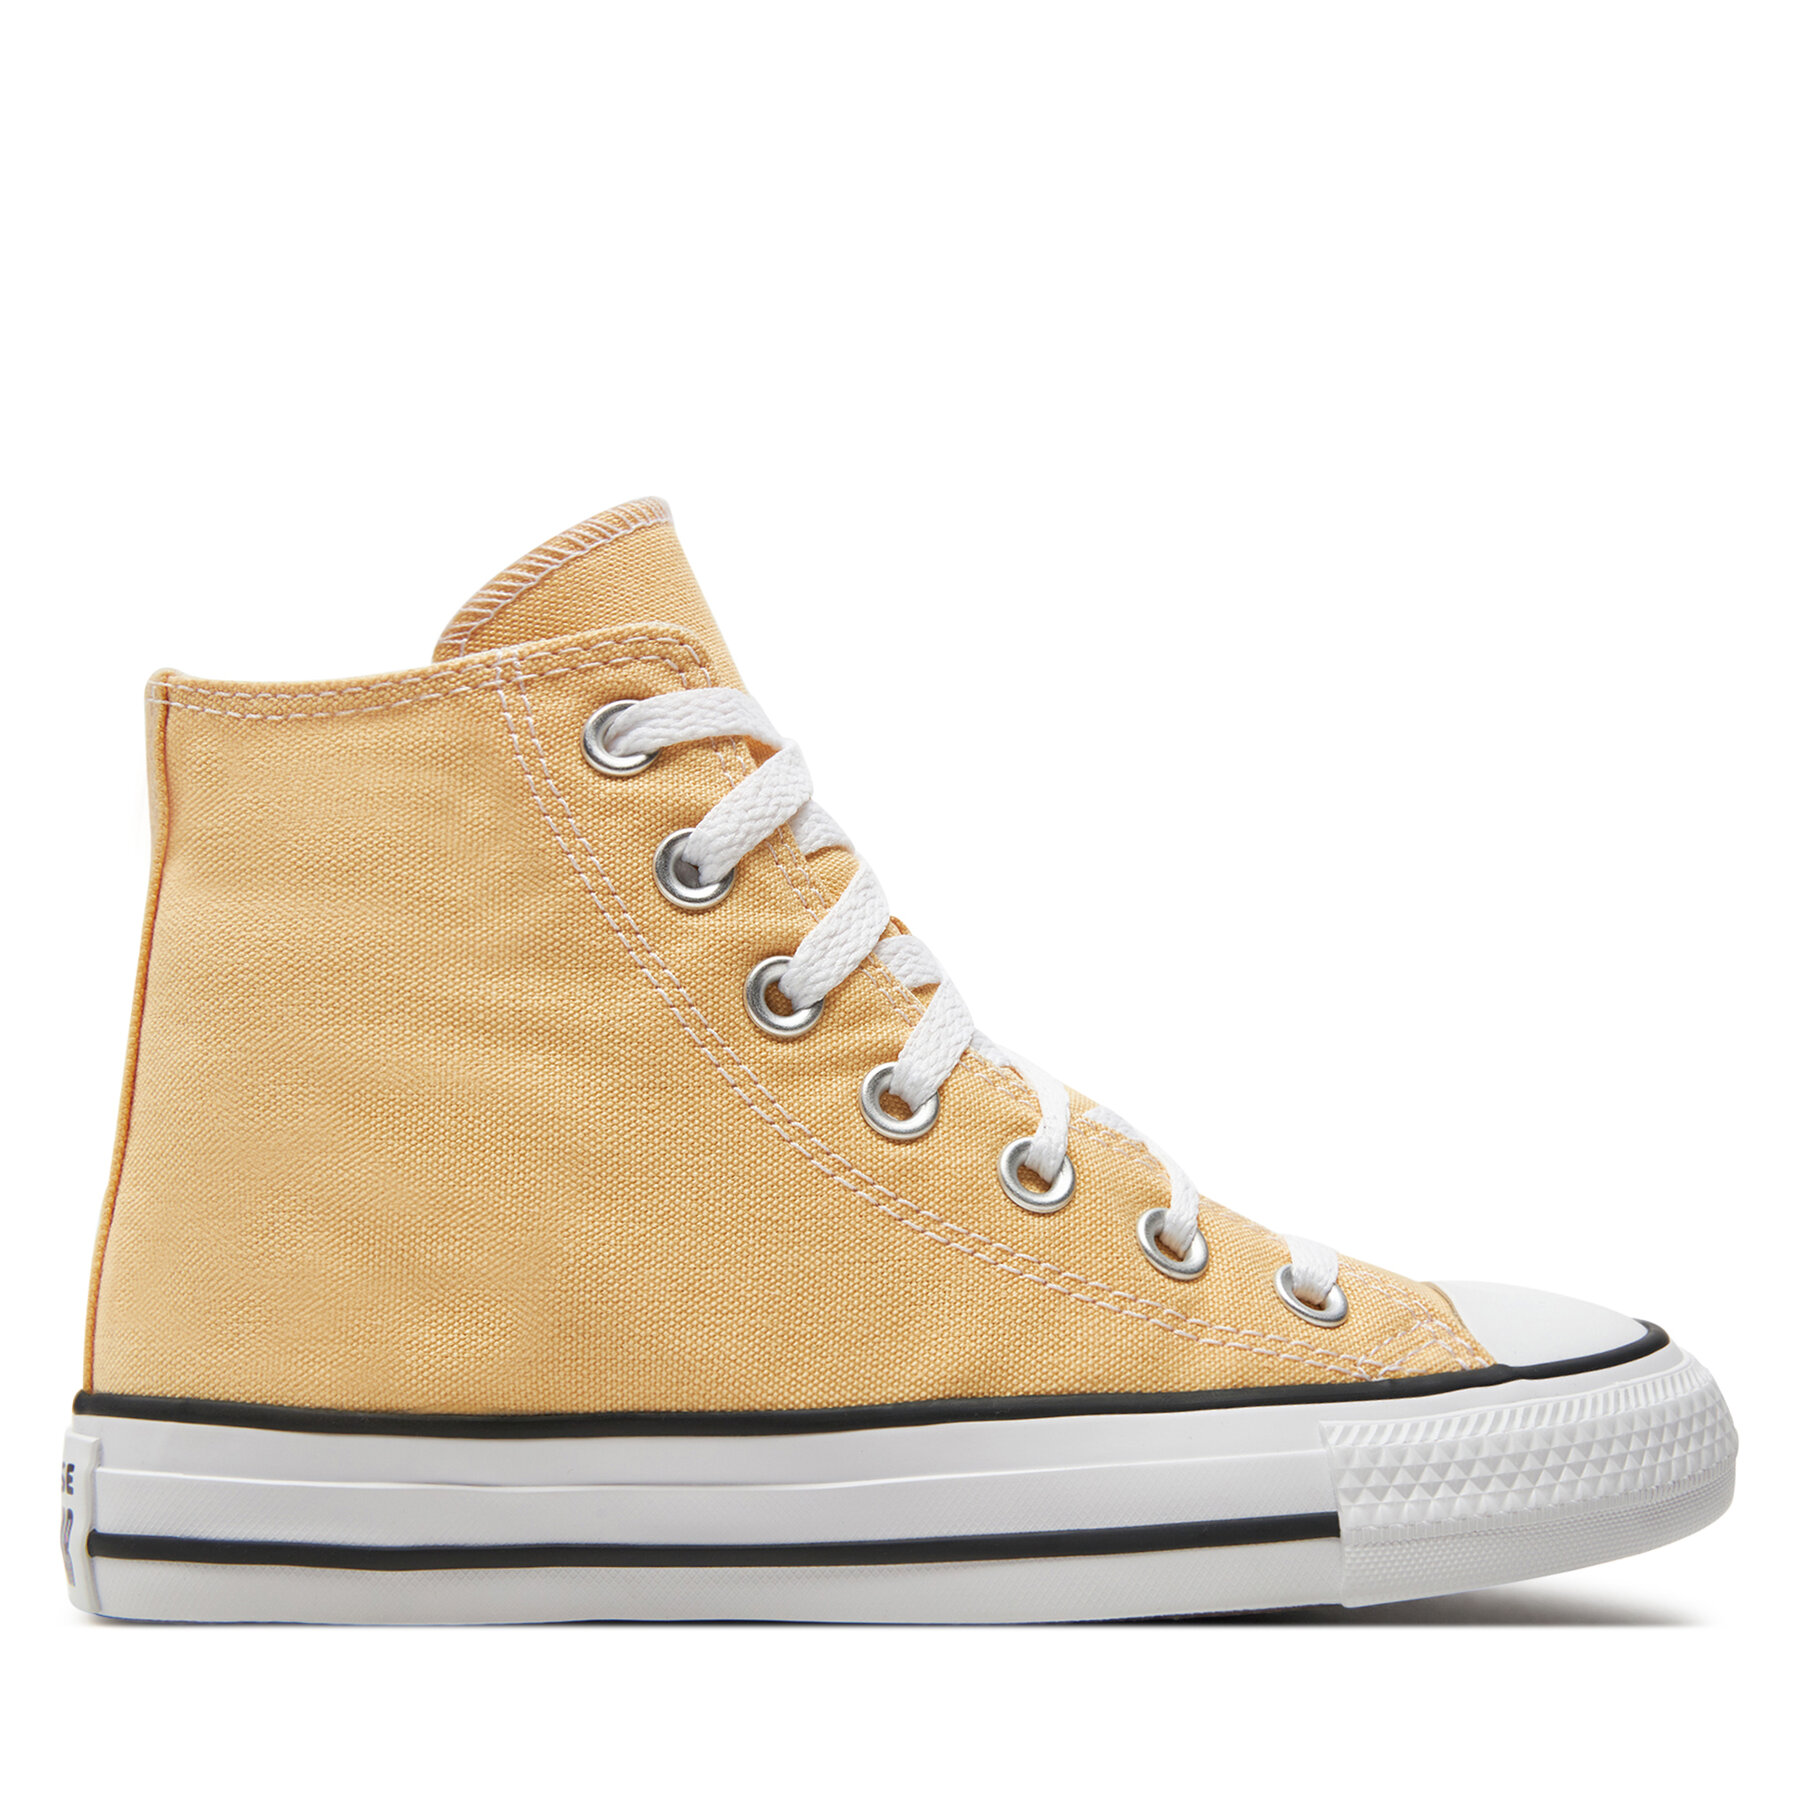 Sneakers aus Stoff Converse Chuck Taylor All Star A09826C Afternoon Sun von Converse